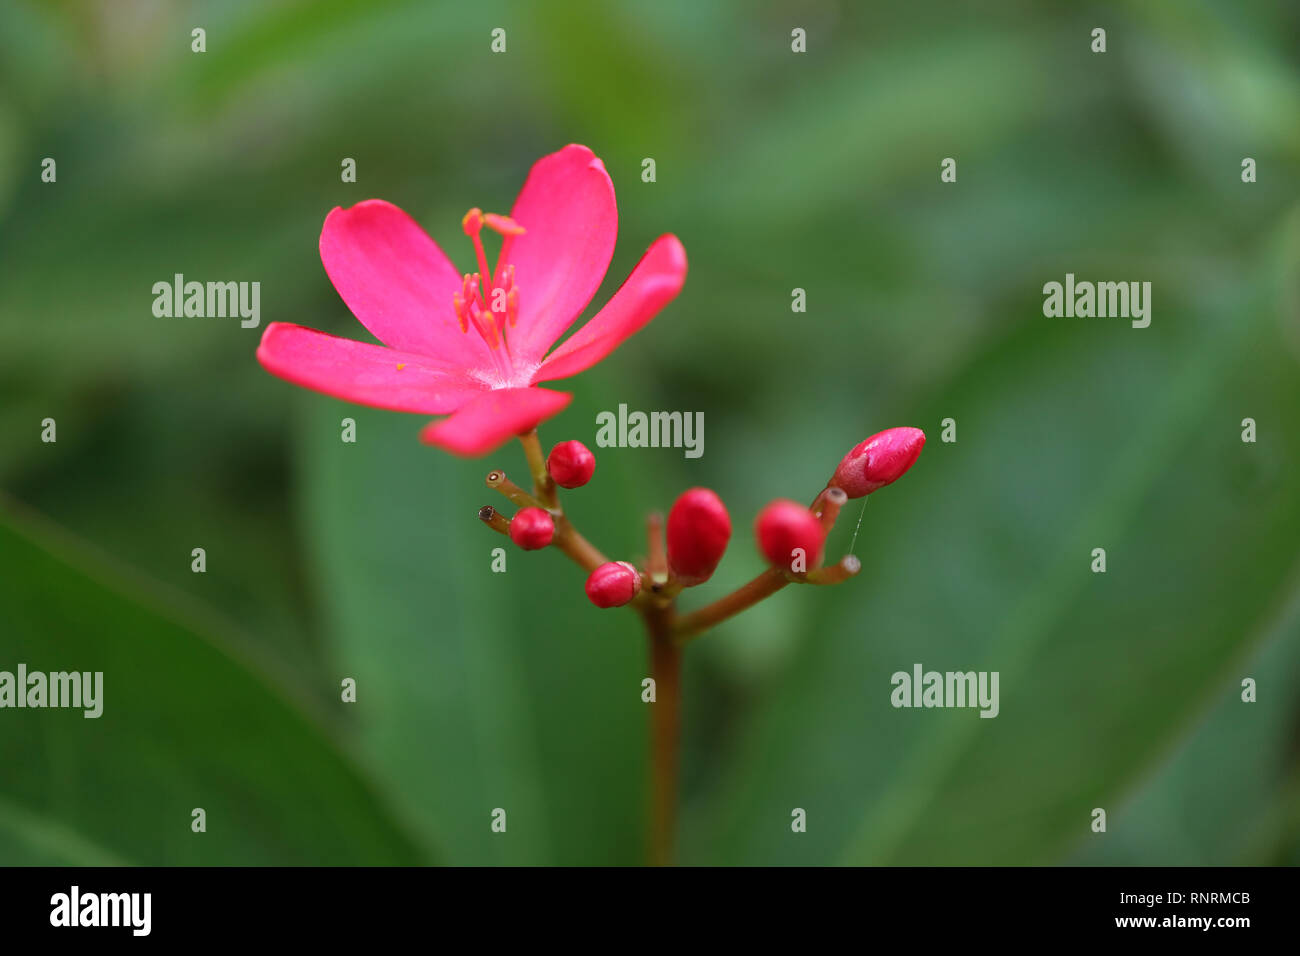 Closed Up a Blooming Jatropha Flower with Flower Buds on Blurry Green Foliage in Background Stock Photo